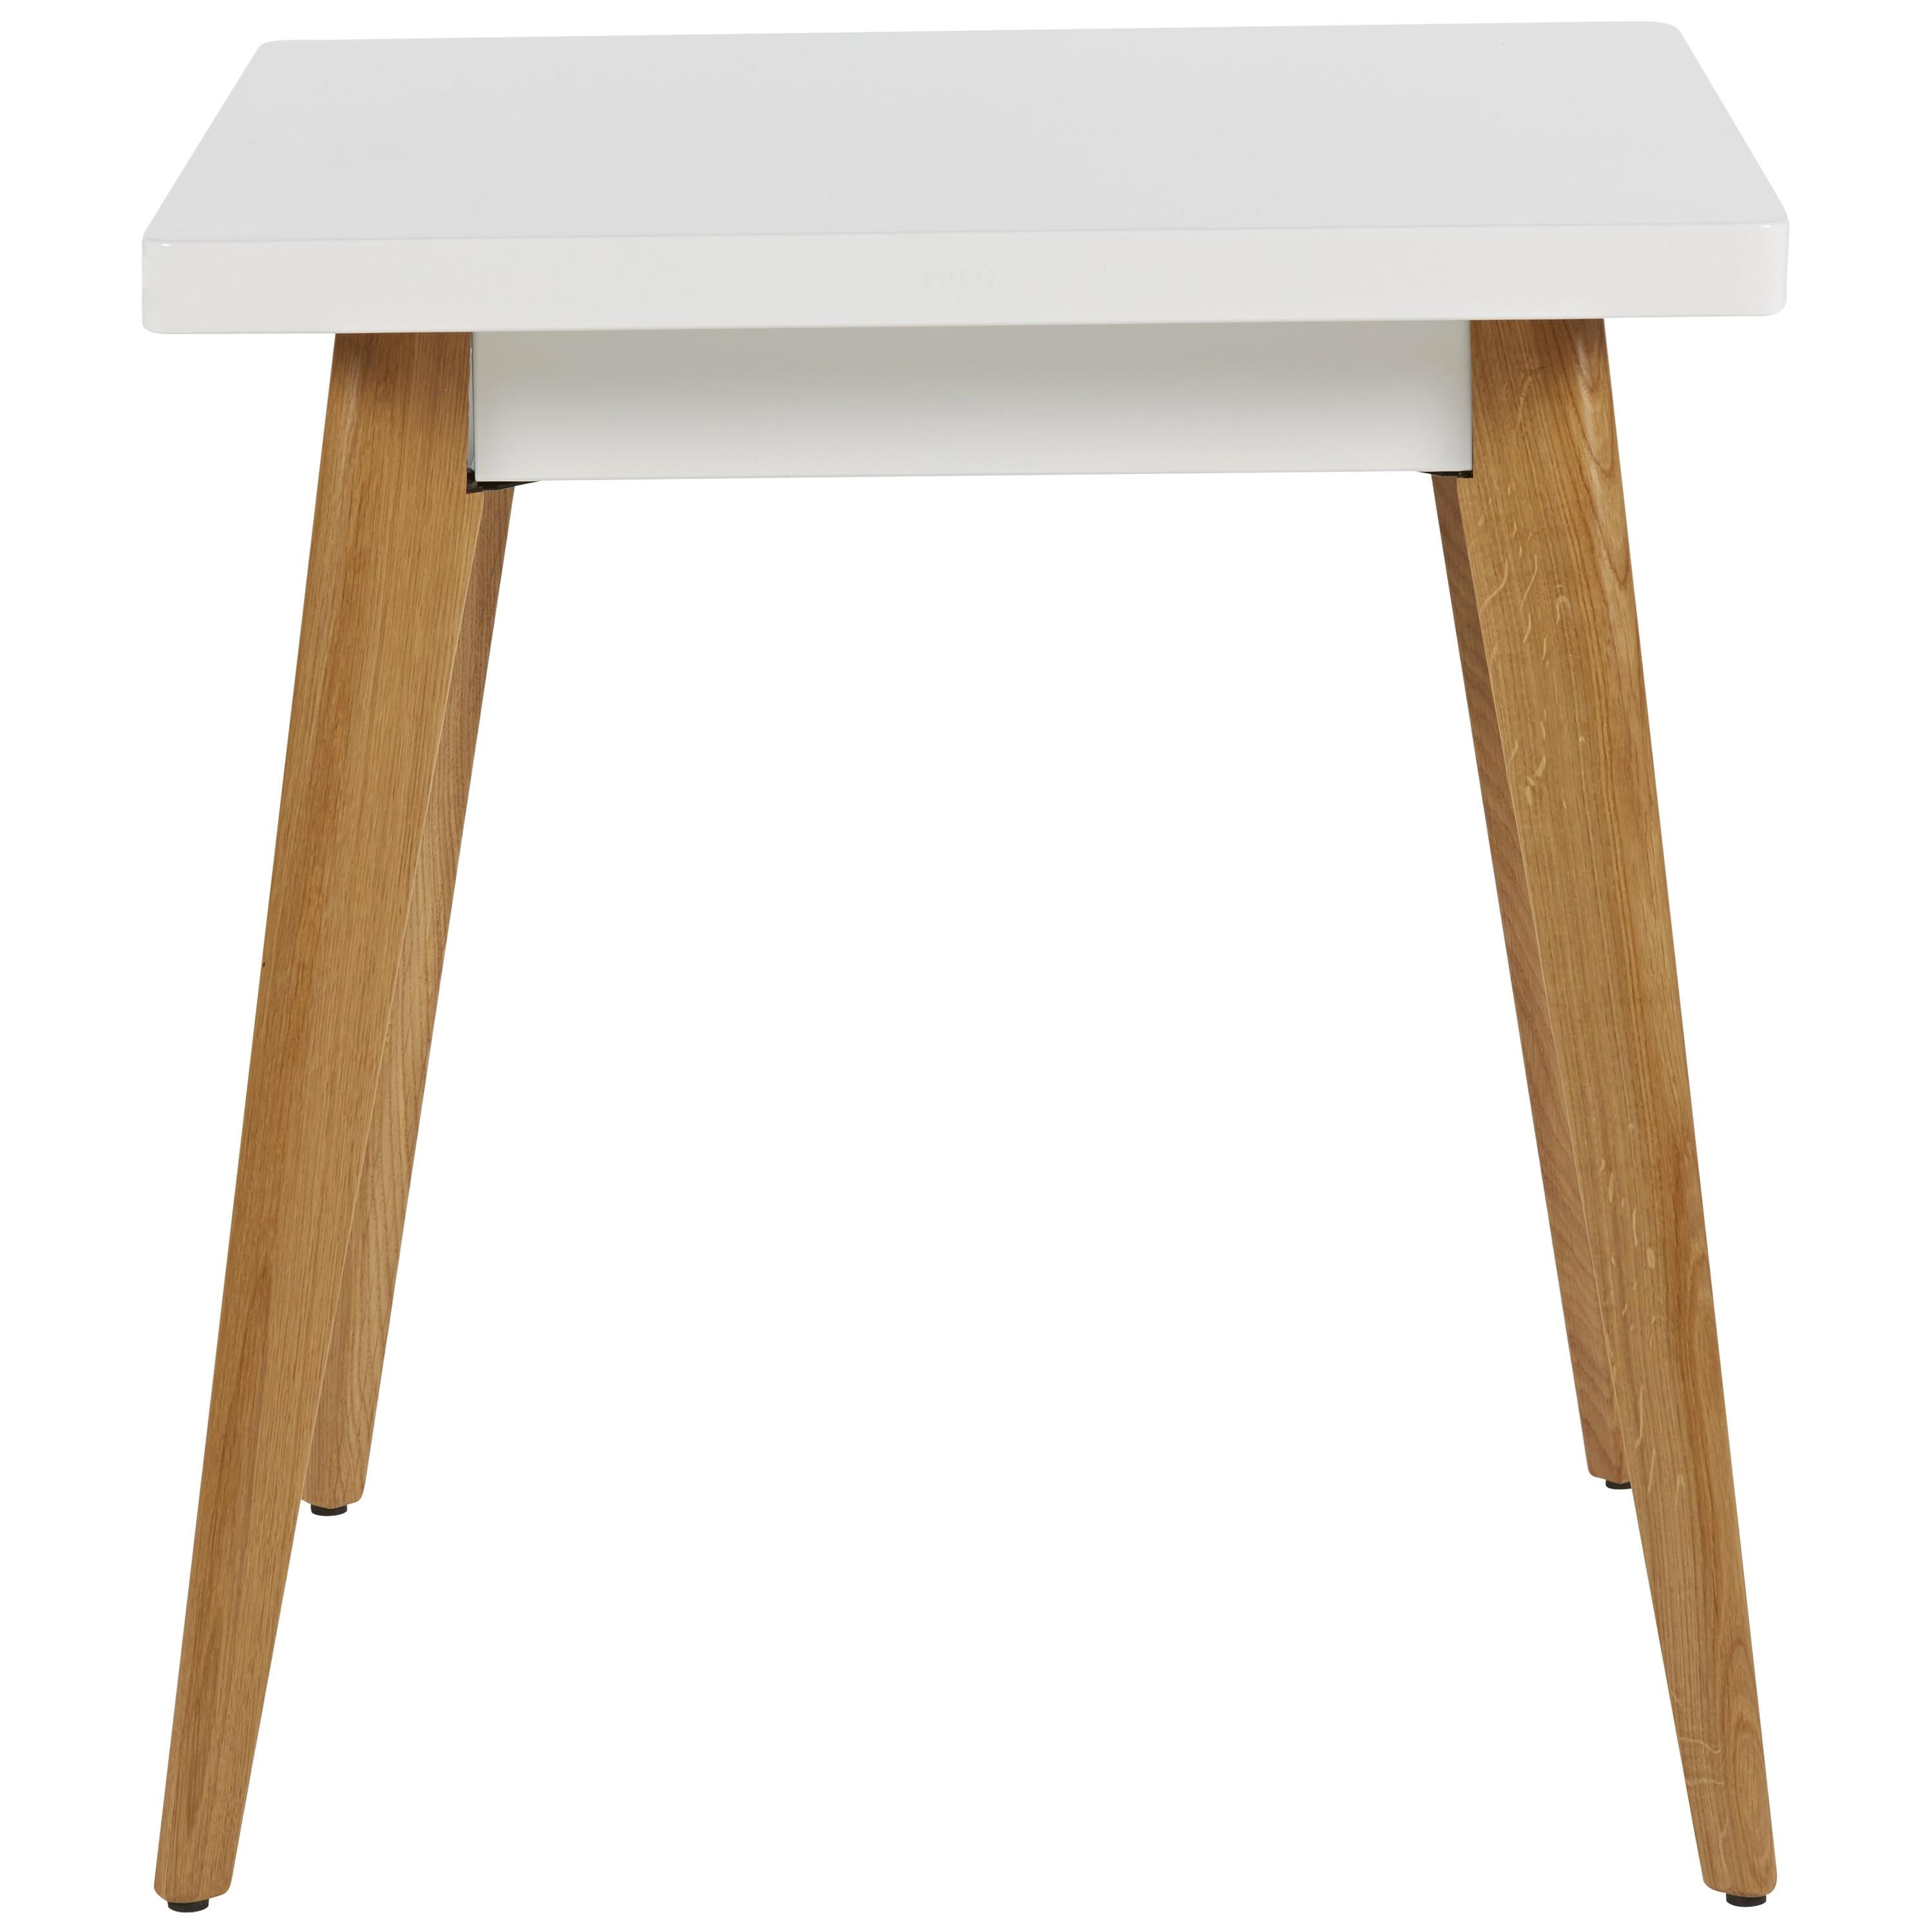 For Sale: White (Blanc) 55 Square Side Table with Wood Leg 70x70 by Jean Pauchard & Tolix